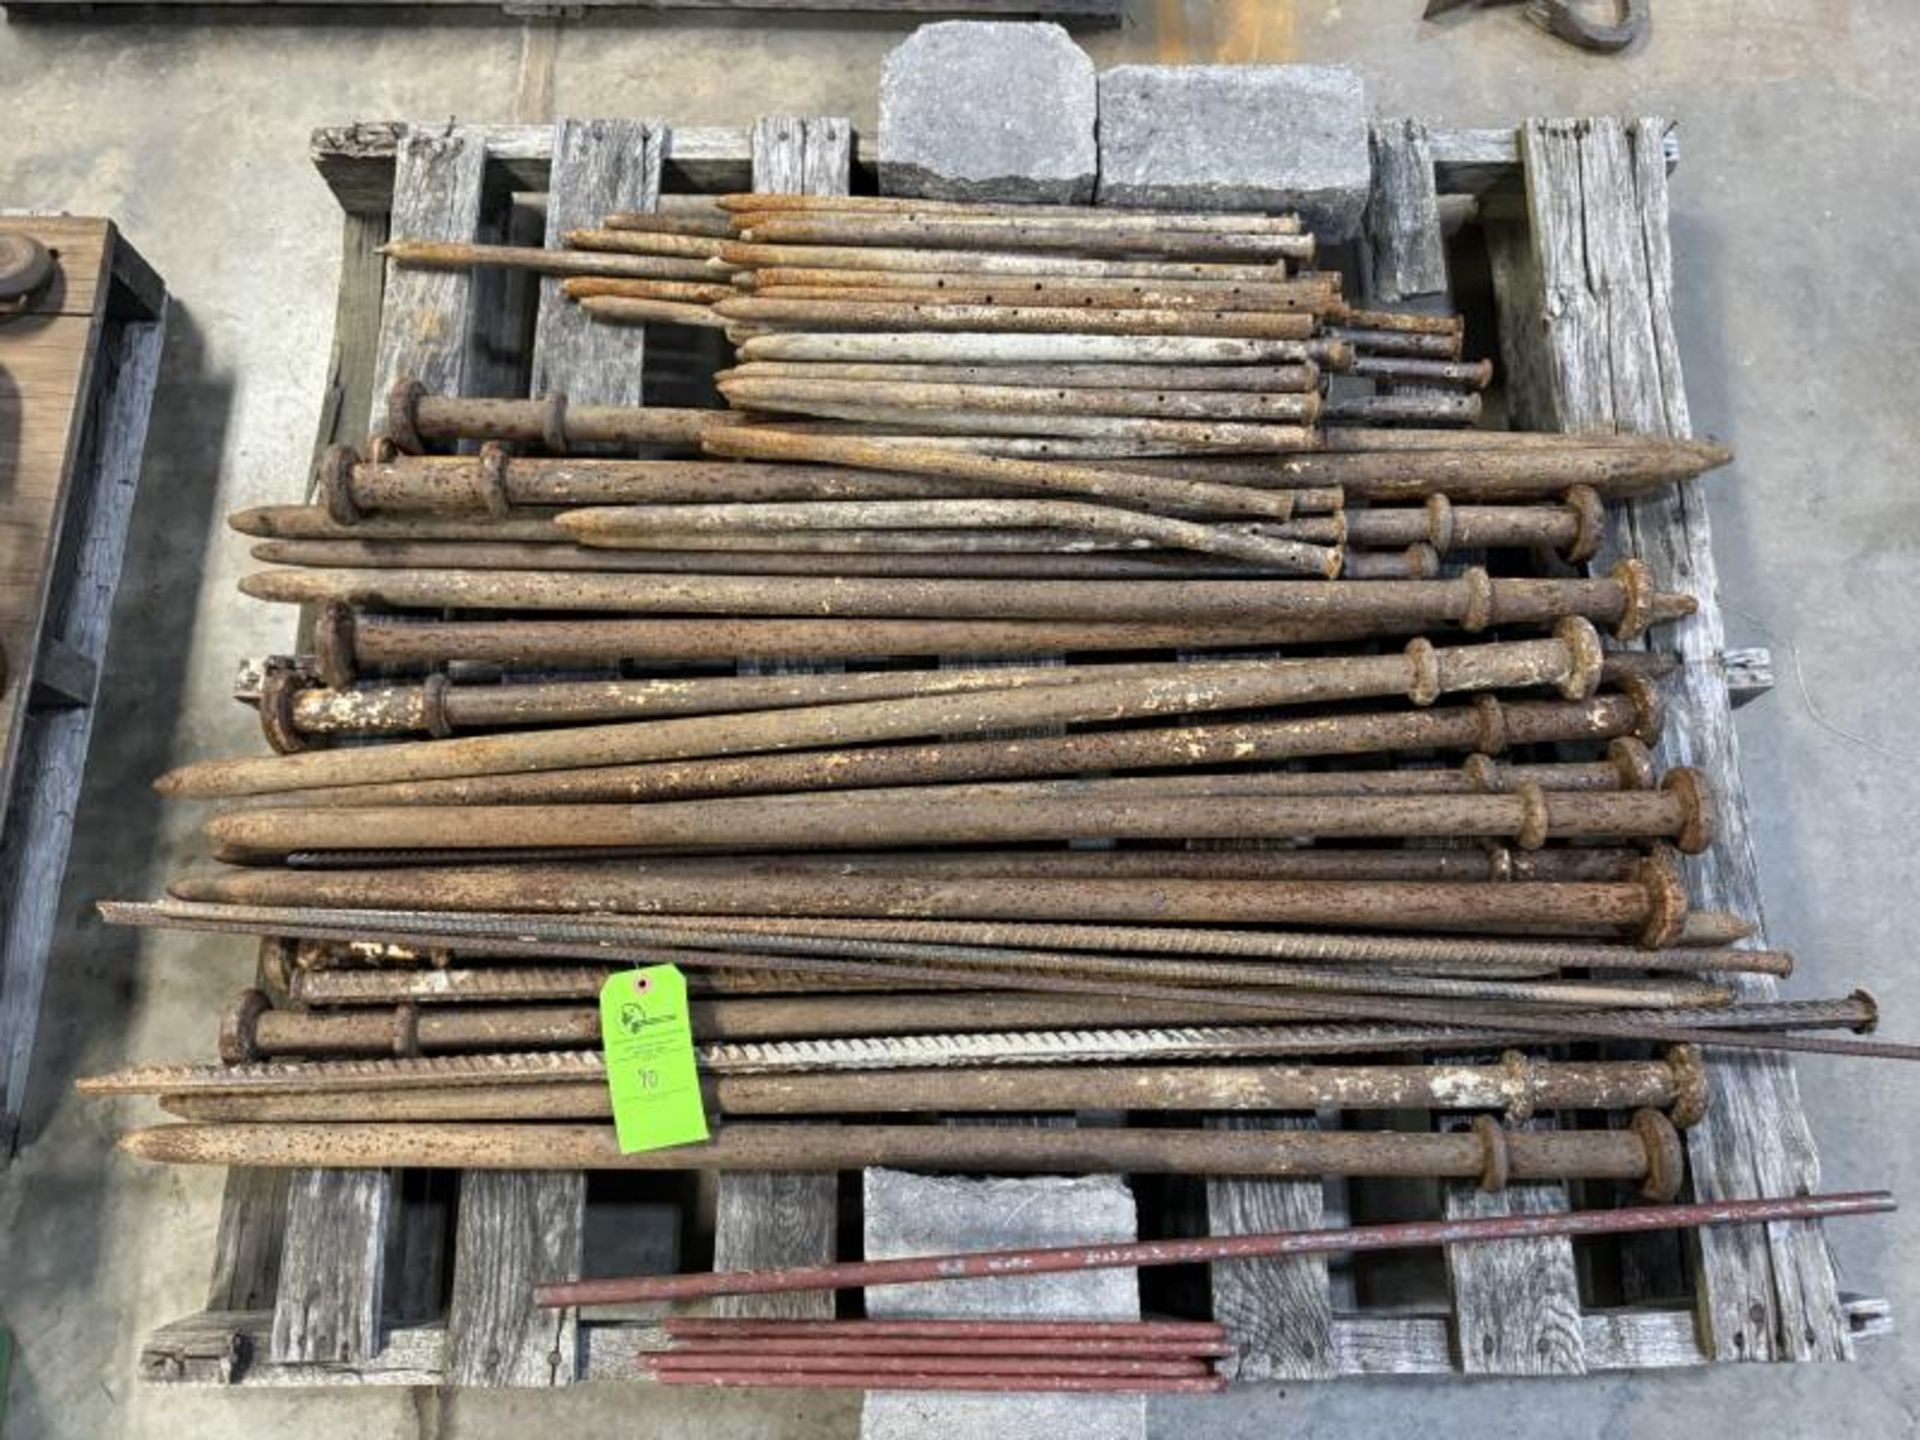 Pallet Lot of Tent & Form Stakes; Varies Sizes Pallet Lot of Tent & Form Stakes; Varies Sizes & Leng